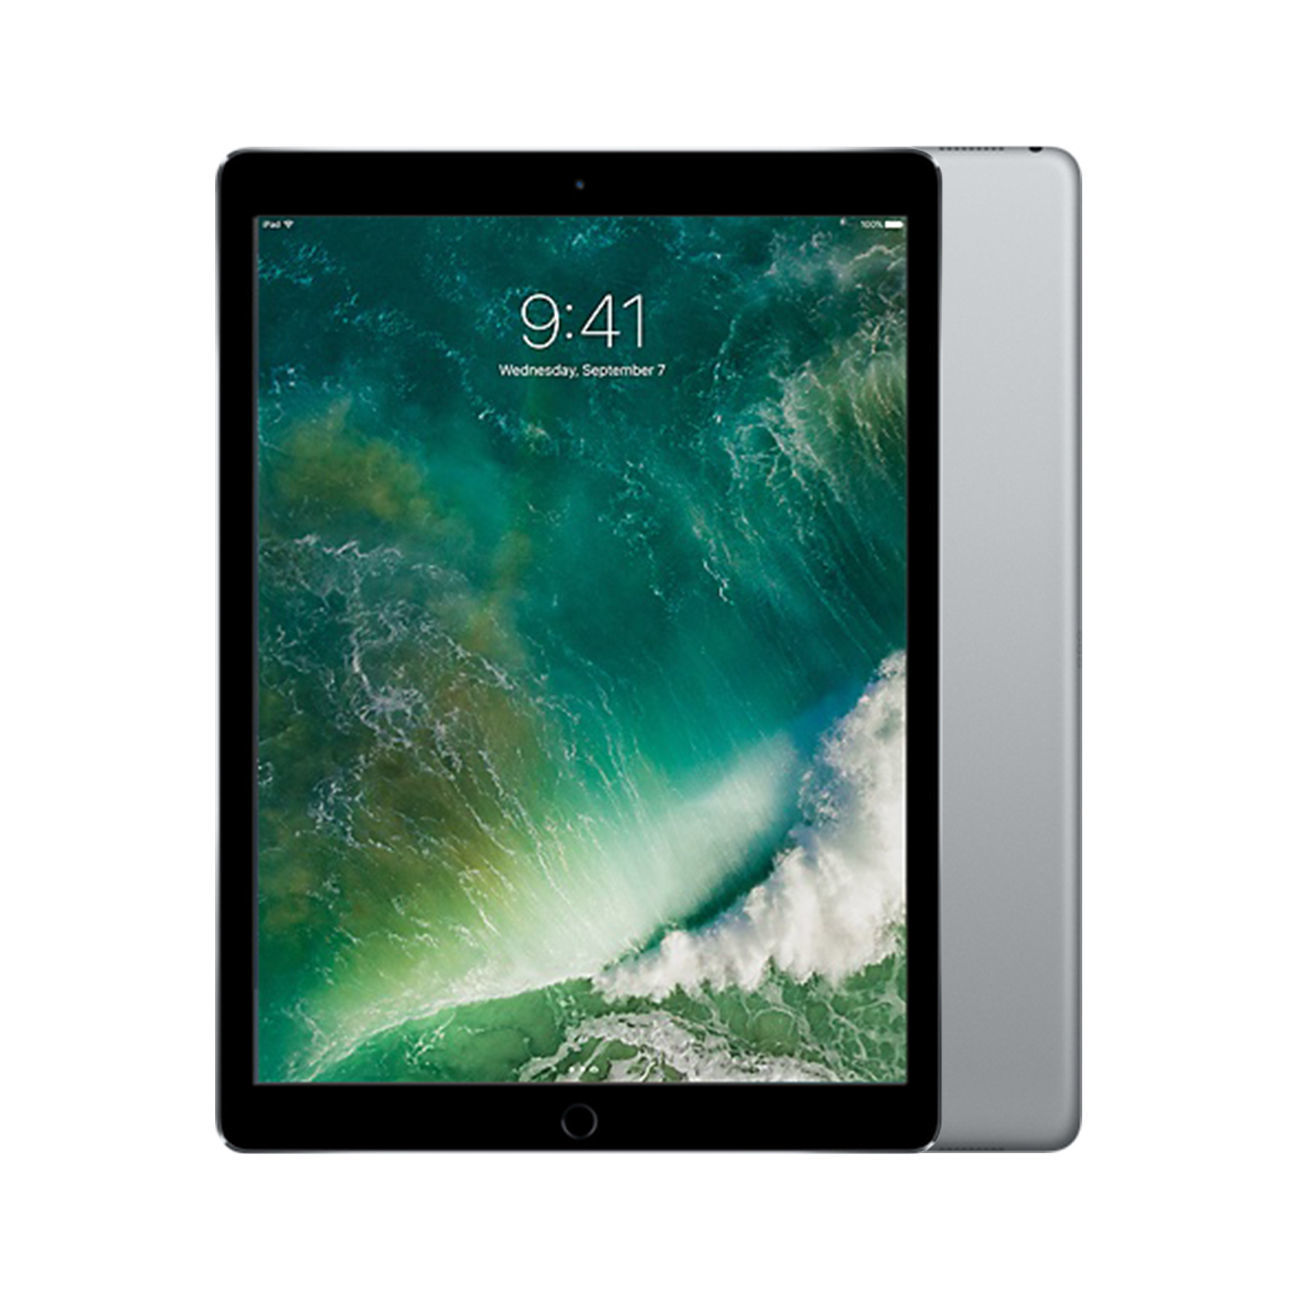 Apple iPad Pro 9.7 Wi-Fi + Cellular [32GB] [Space Grey] [Excellent] [12M]